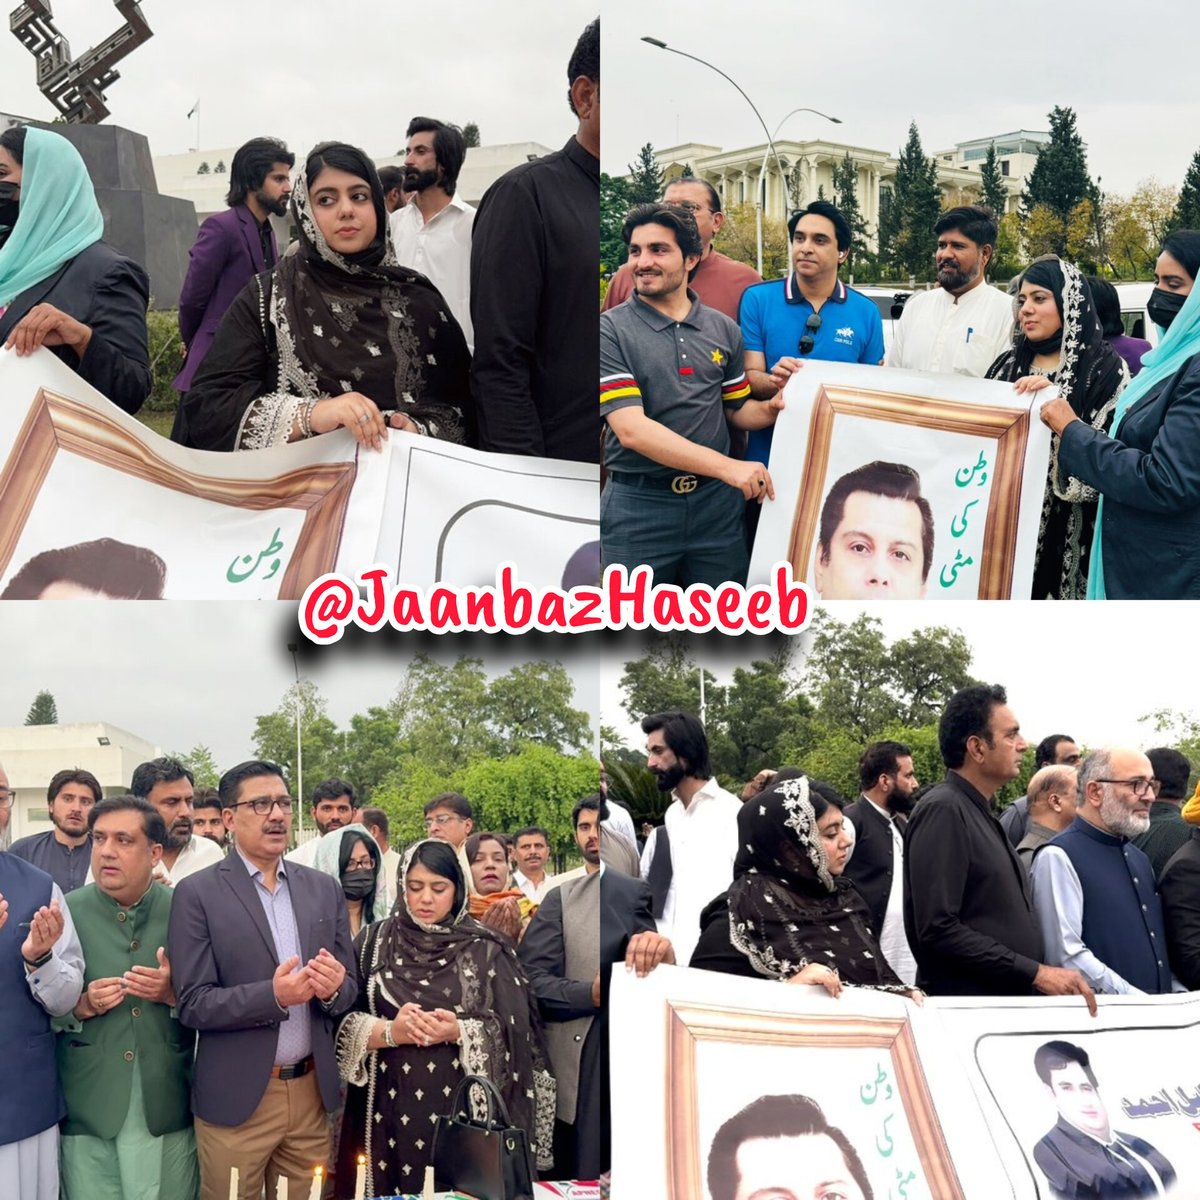 On the Day of World Press Freedom, The Journalist Society and Wife of @Arsched Sharif Shaheed Leads the Rally for Justice for Arshad Sharif Shaheed on Sharah E Dastoor Islamabad.
@FarooquiJameel & @SenatorMushtaq were Present for Solidarity with @Javerias.

#ArshadSharifShaheed